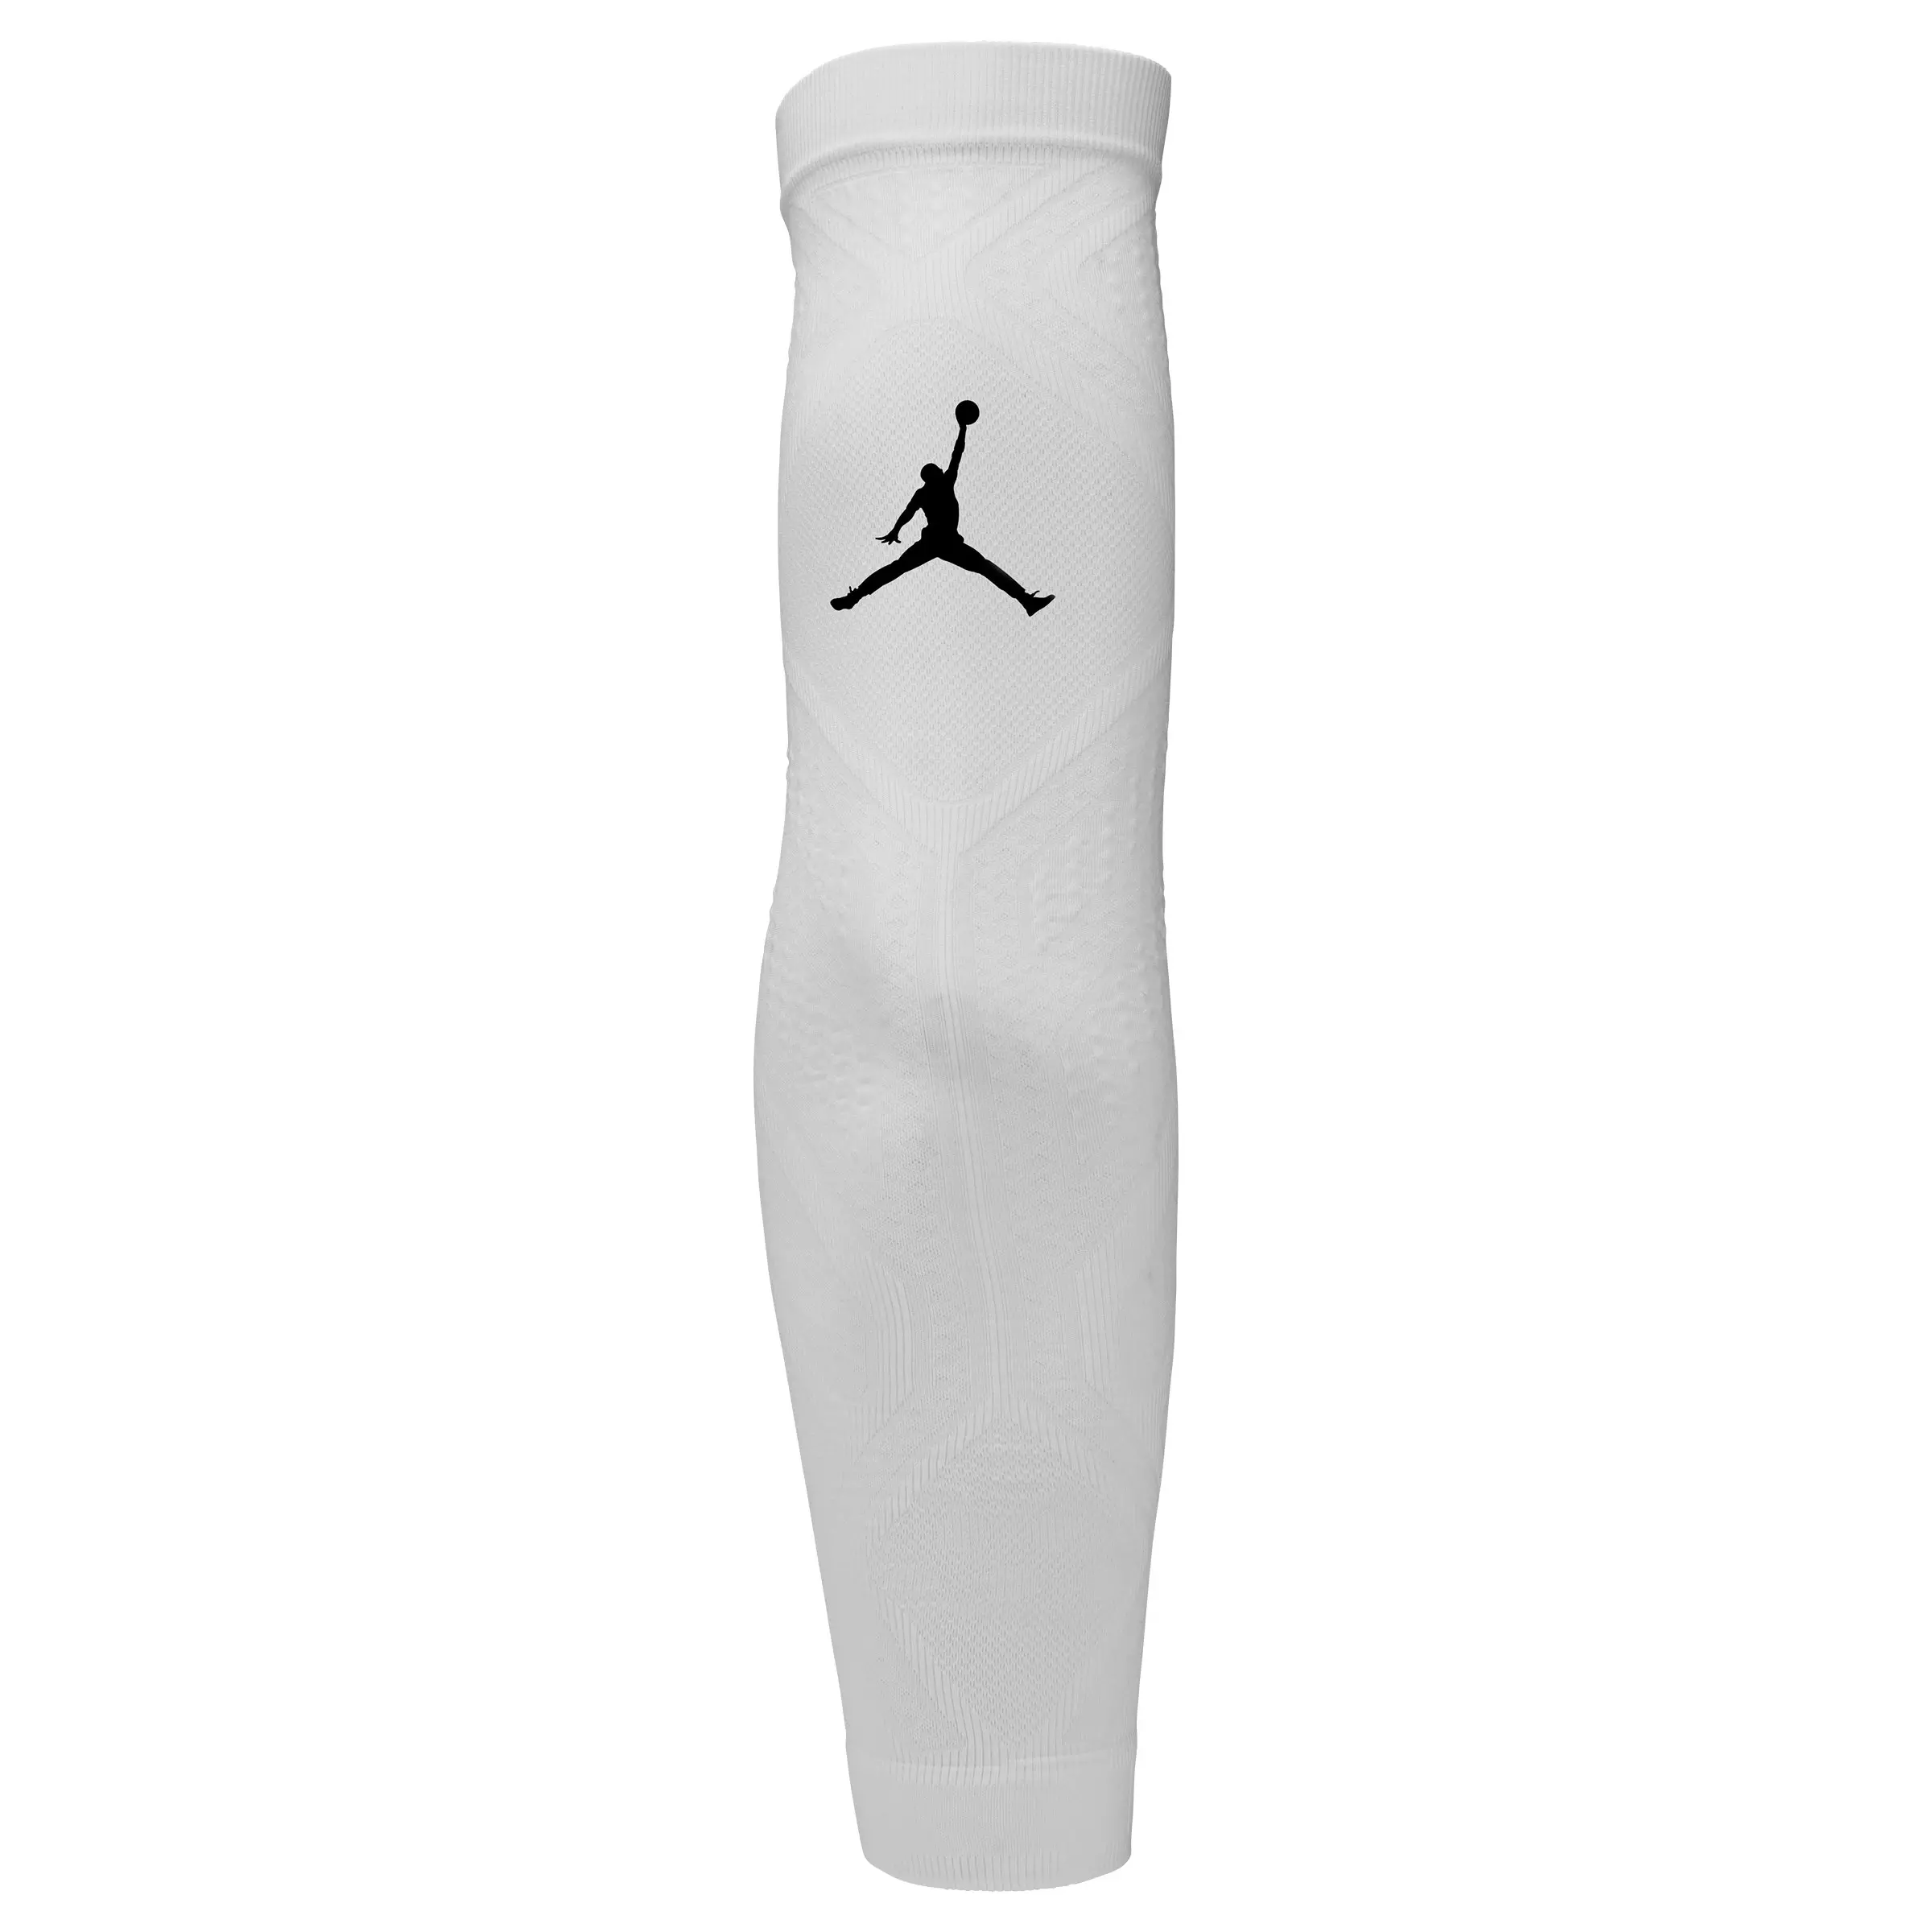 Basketball Arm Sleeves in many sizes by Nike, adidas, Under Armour